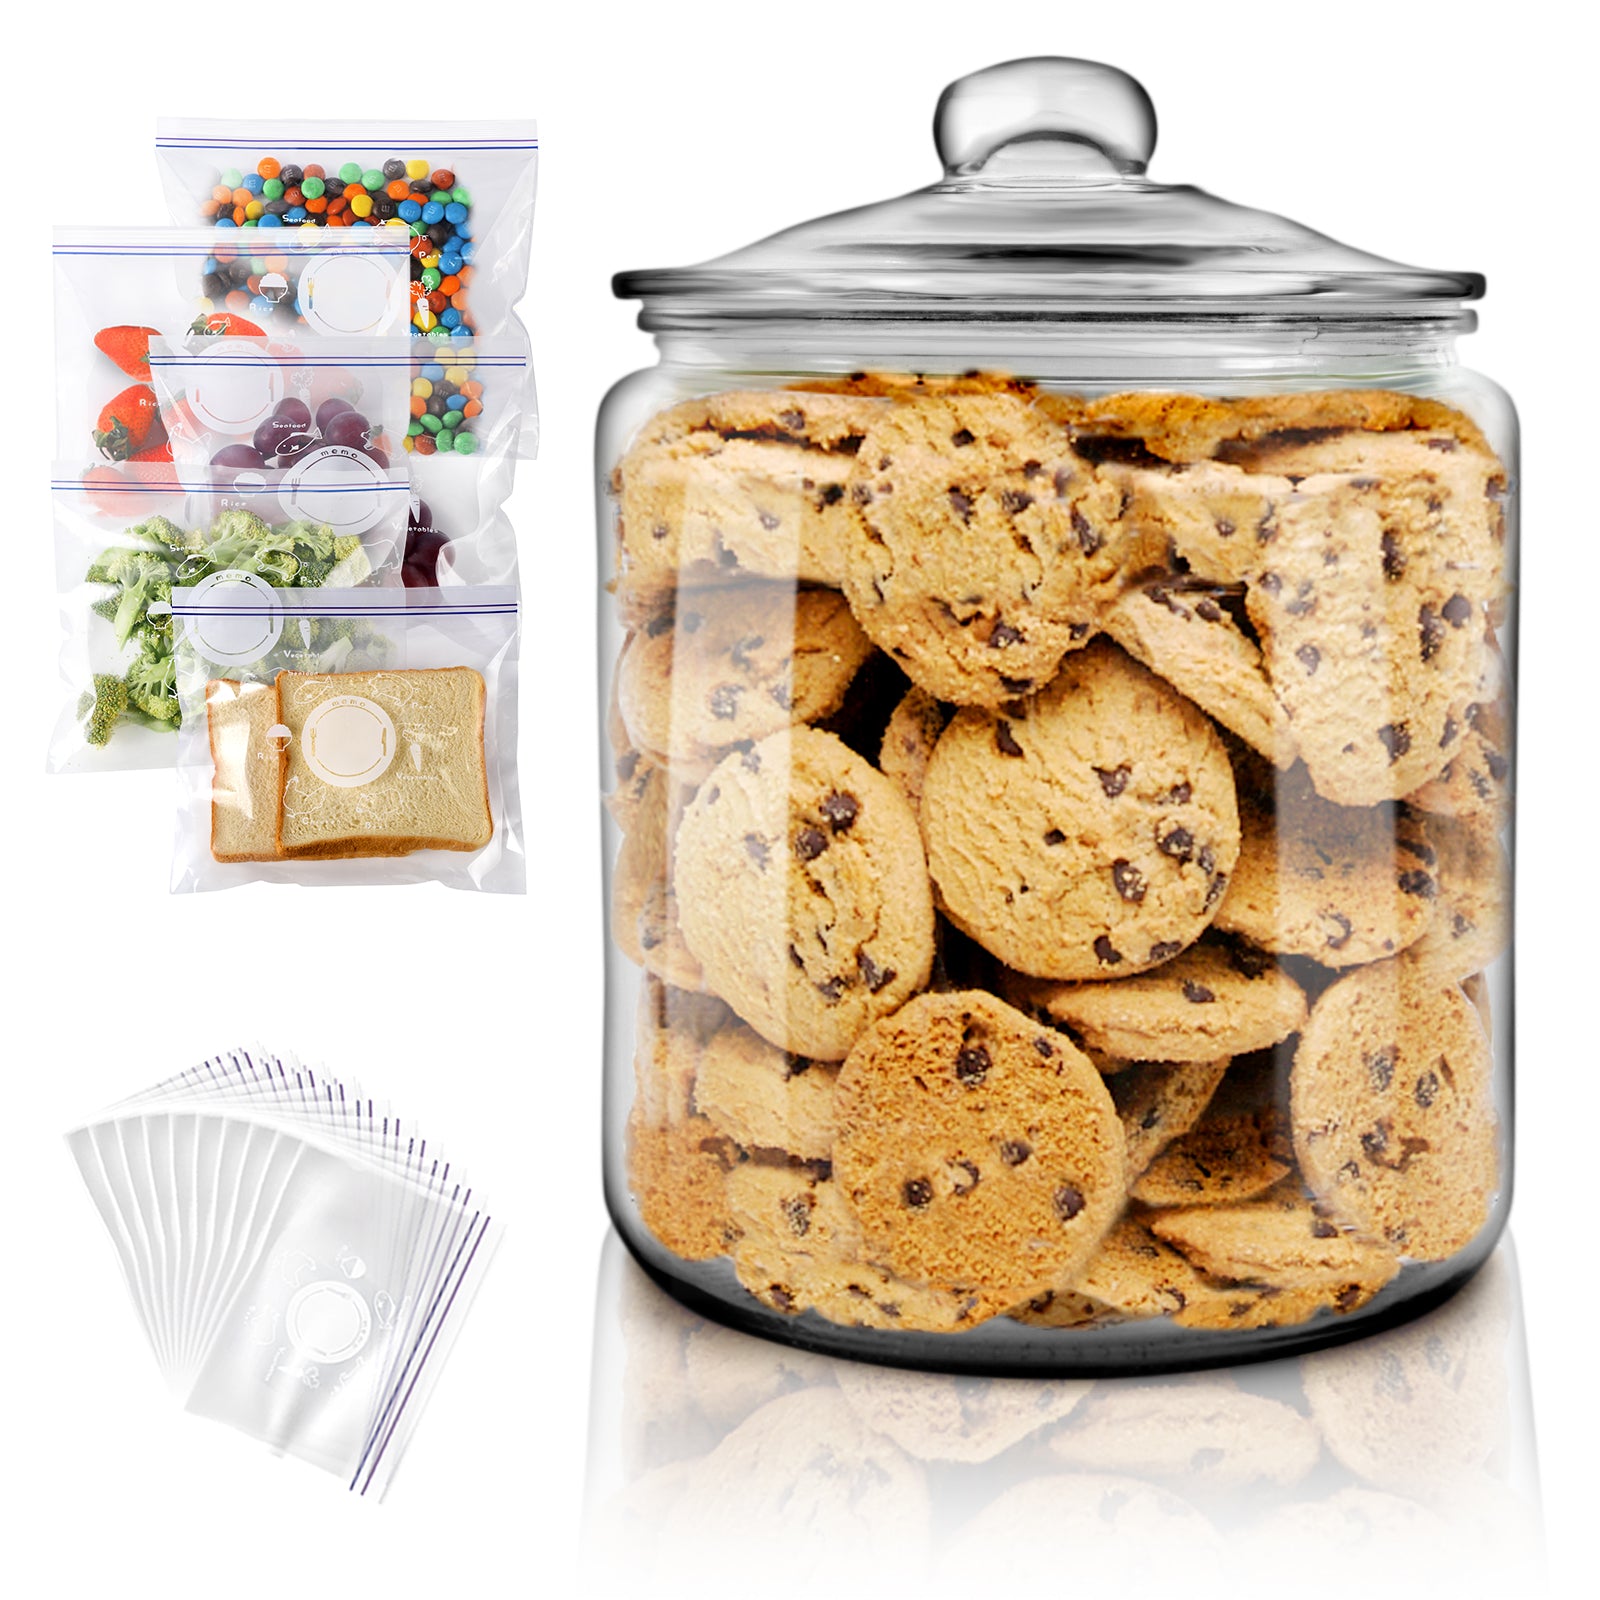 Masthome Large Glass Jar,1 Gallon Glass Jar with Lid, Airtight,Dishwasher  Safe,Wide Mouth Glass Storage Canister for Pasta,Flour,Nuts,Cookies